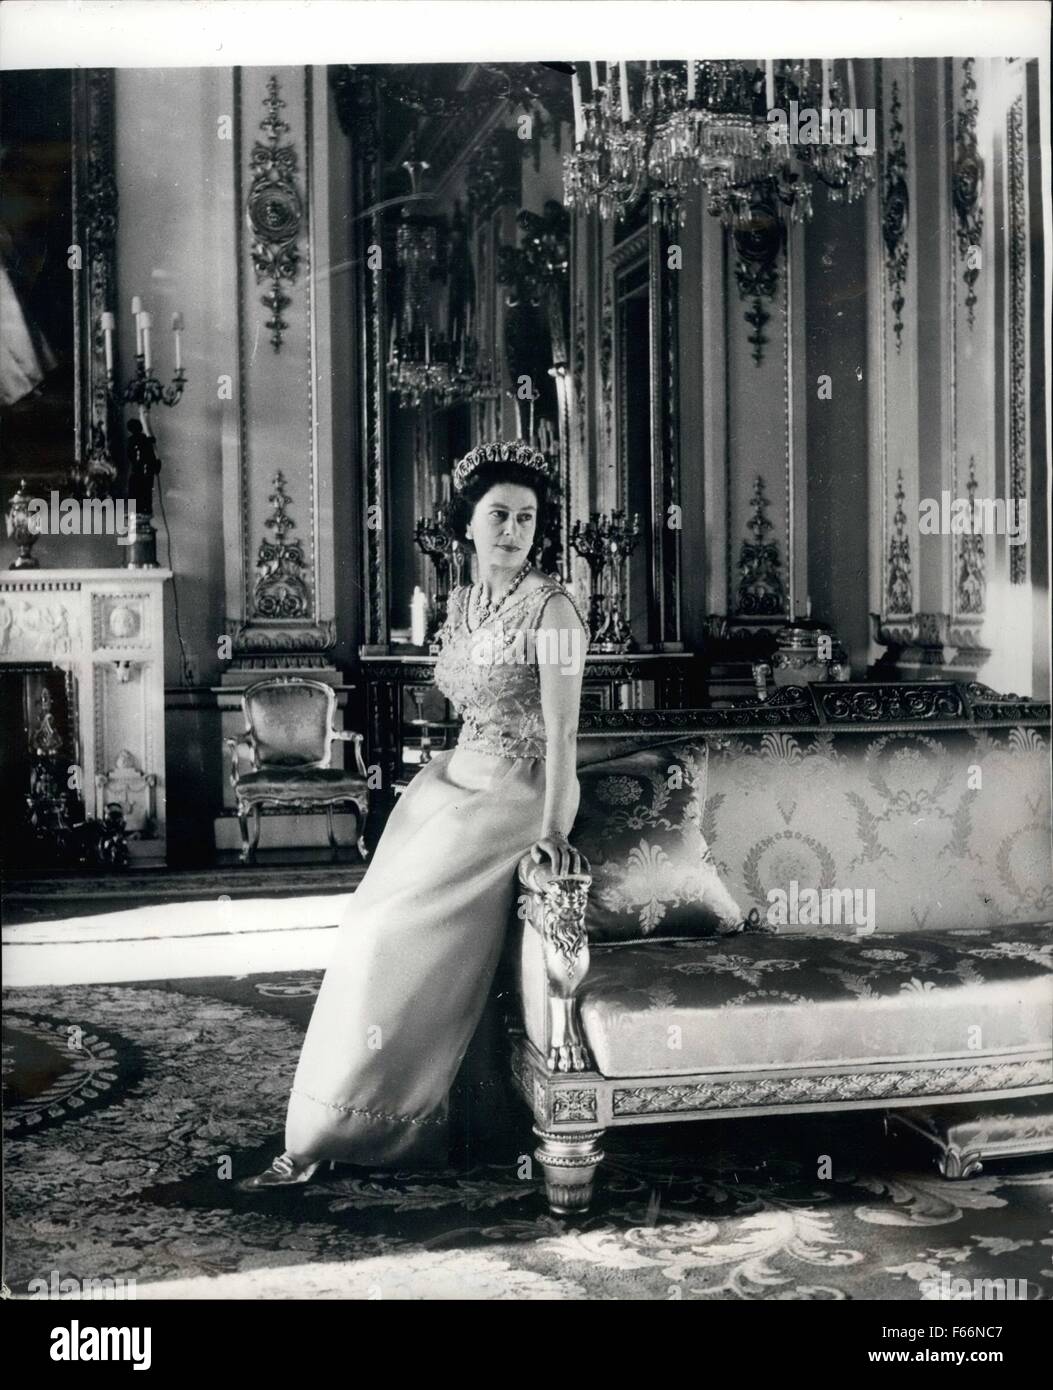 1969 - H.M. Queen Elizabeth II H.M. The Queen's 43rd Birthday was celebrated on Monday, 21st April 1969. Her majesty, in a turquoise silk evening dress is portrayed in the White Drawing Room at Buckingham Palace. The Pearl and diamond tiara she is wearing was bought by Queen Mary from the family of the Grand Duchess Vladimir of Russia in 1921; the pearl and diamond necklace was presented to Queen Victoria at the time of the building of the Albert Hall. The settee with the carved frame is English, of the Regency period. © Keystone Pictures USA/ZUMAPRESS.com/Alamy Live News Stock Photo